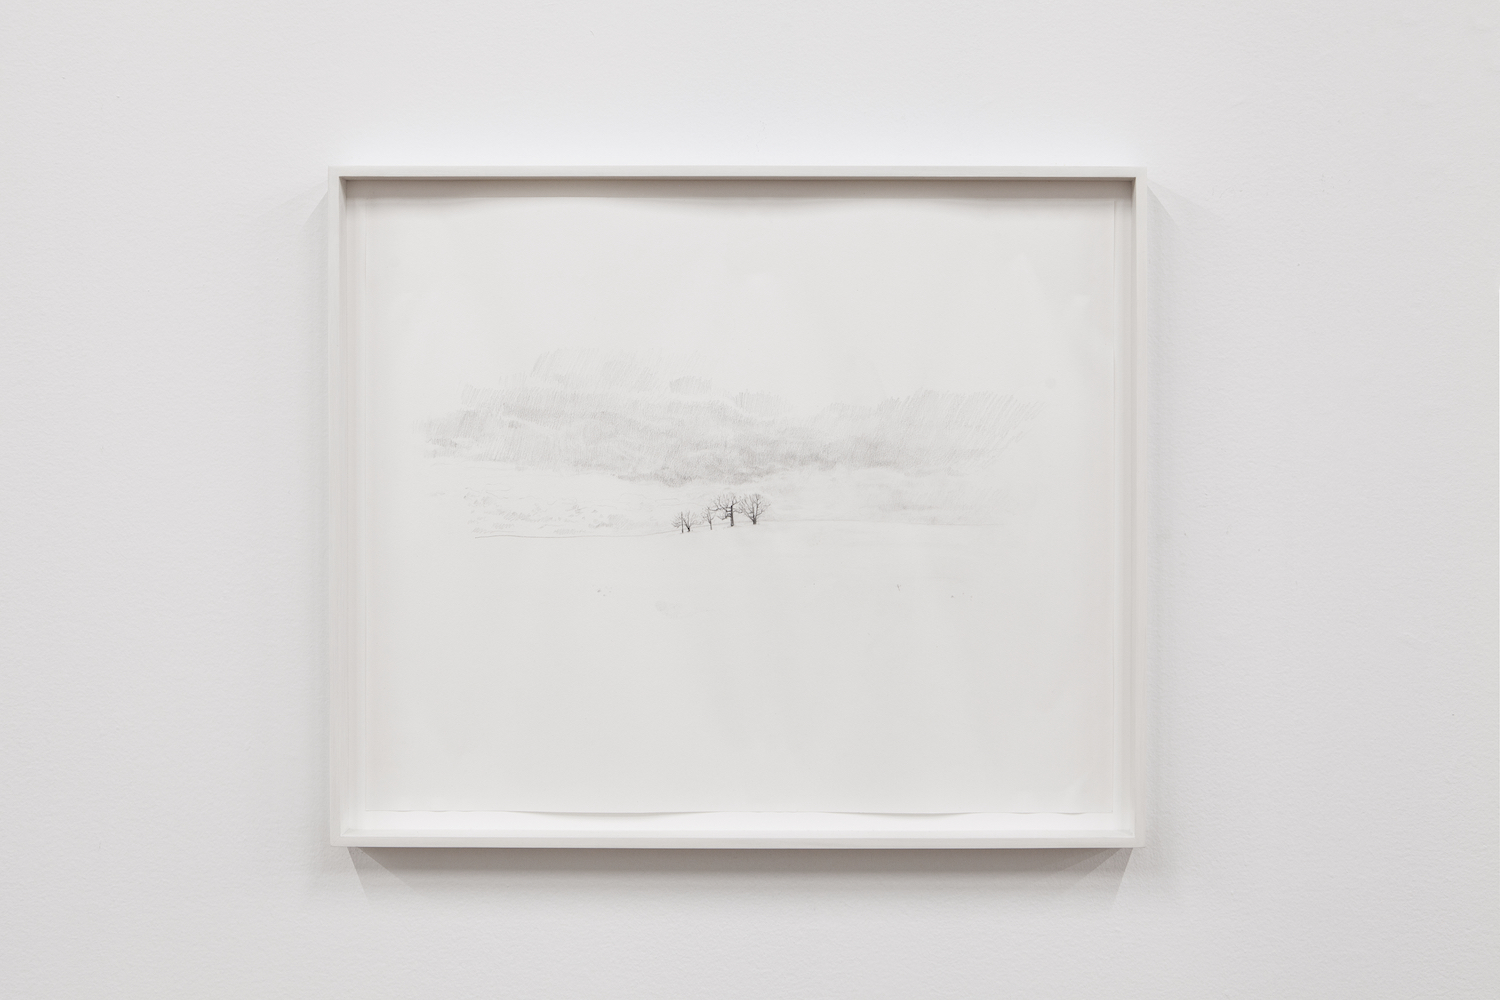 Nash Glynn, *March in the Hudson Valley*, 2018. Graphite on paper 